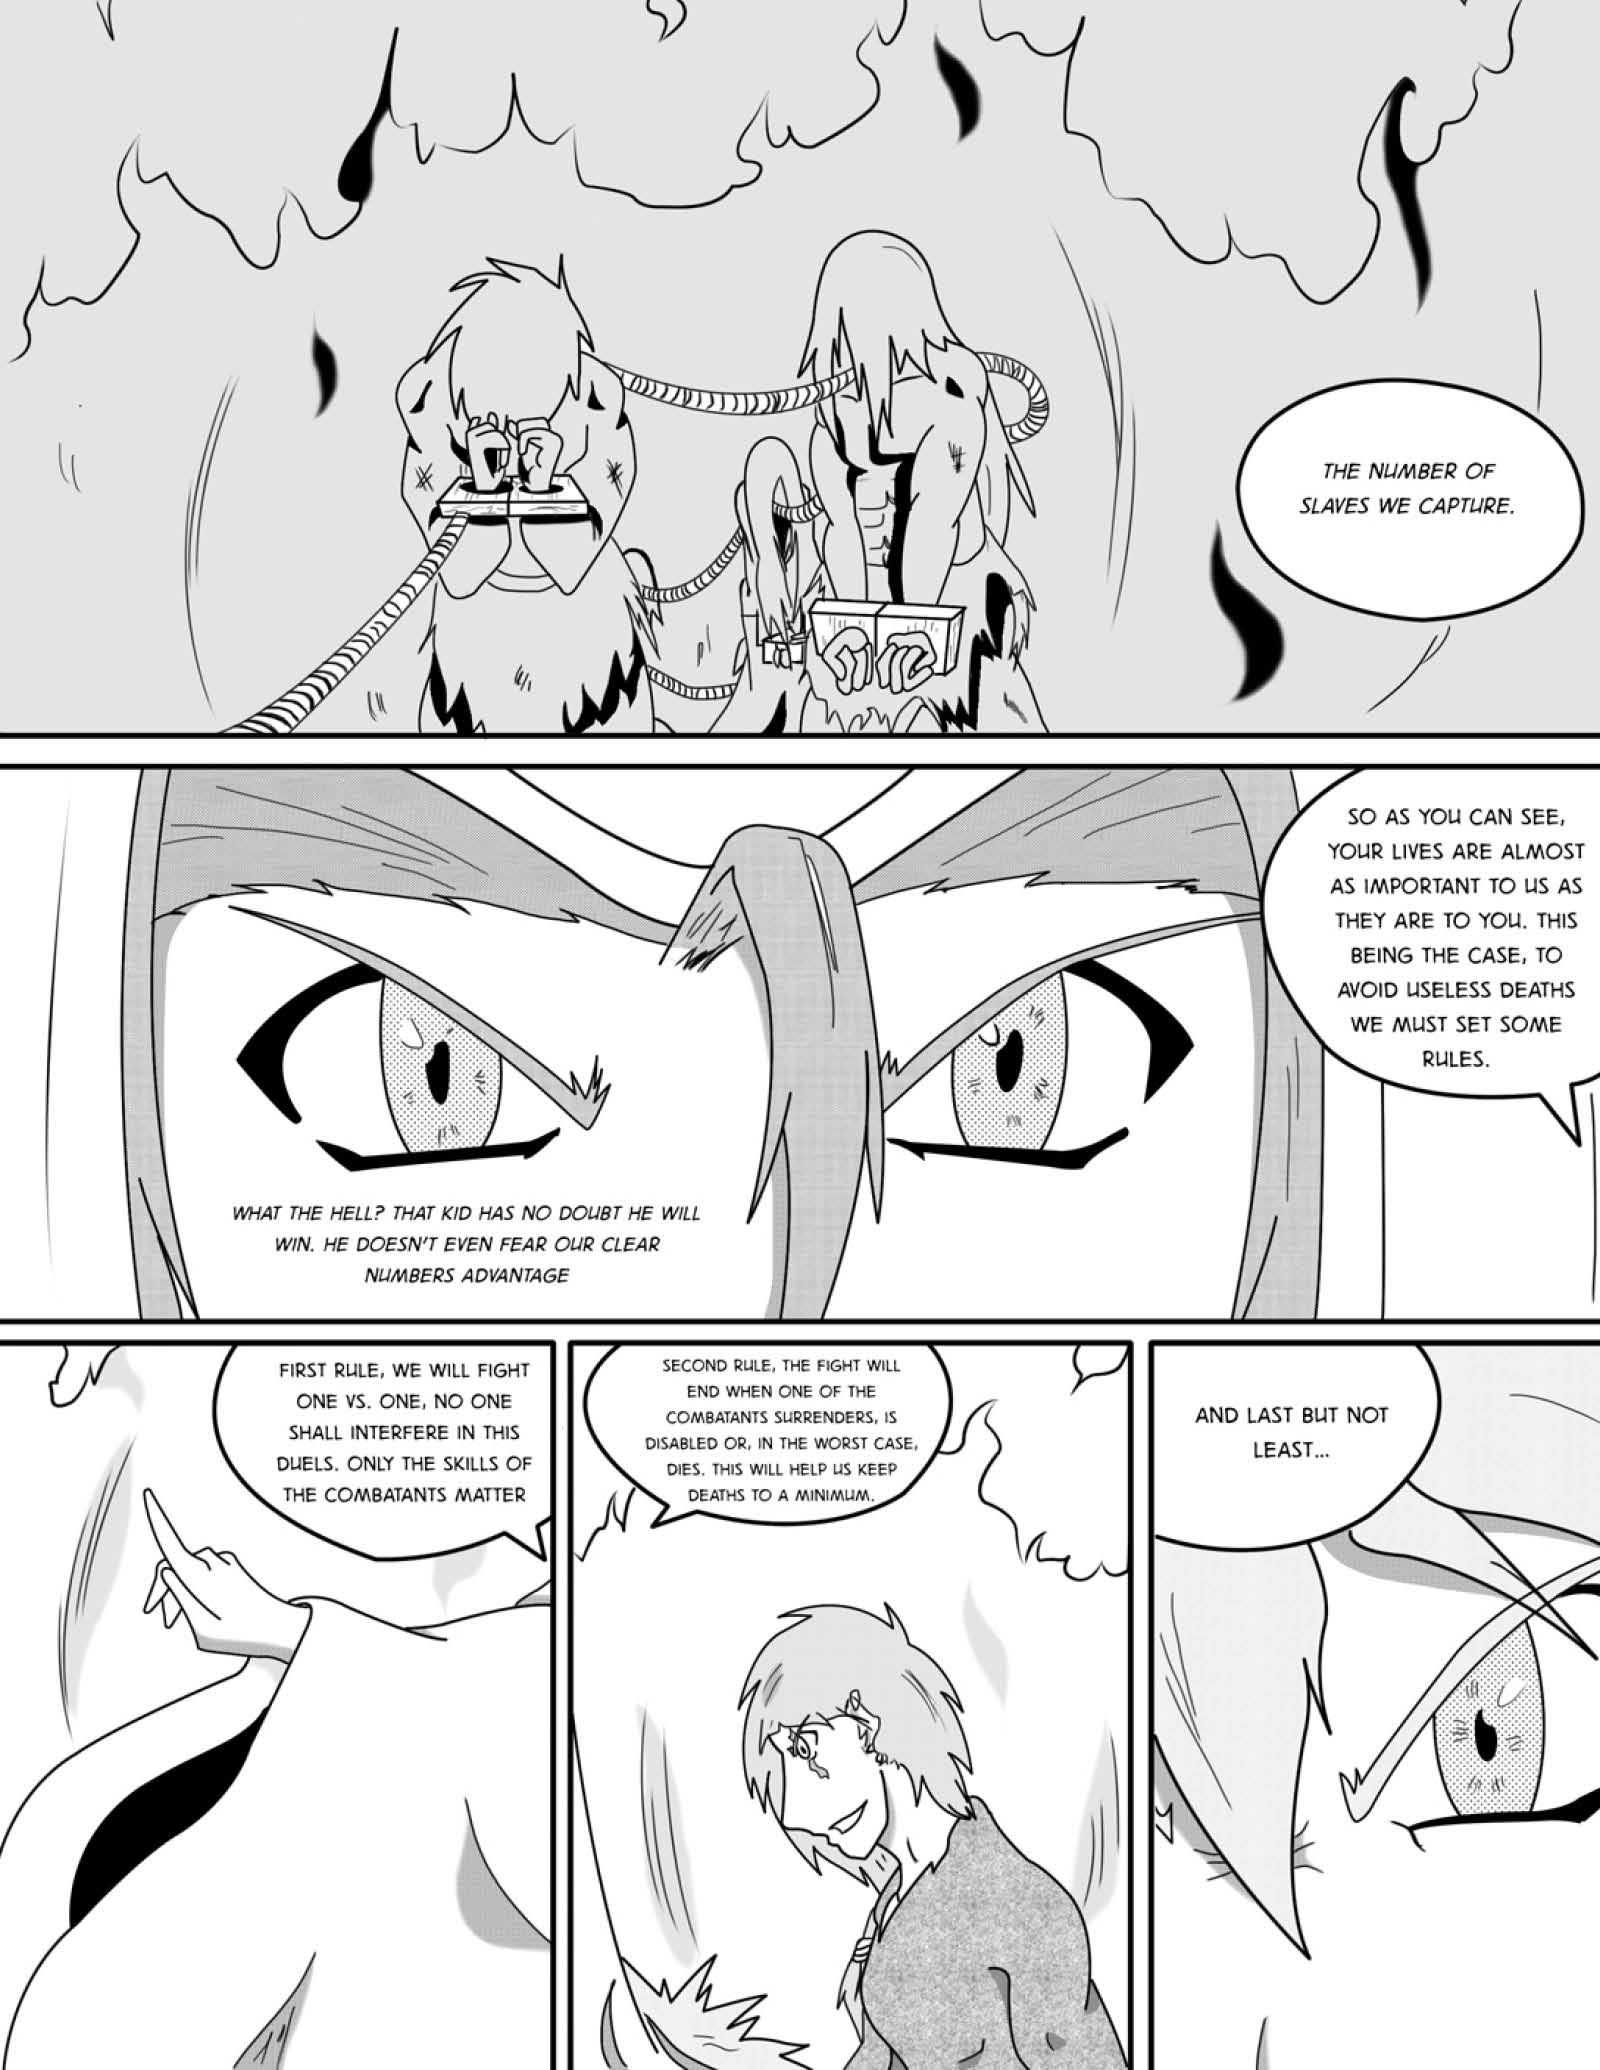 Series Dilan: the Chronicles of Covak - Chapter 2 - Page 7 - Language ENG